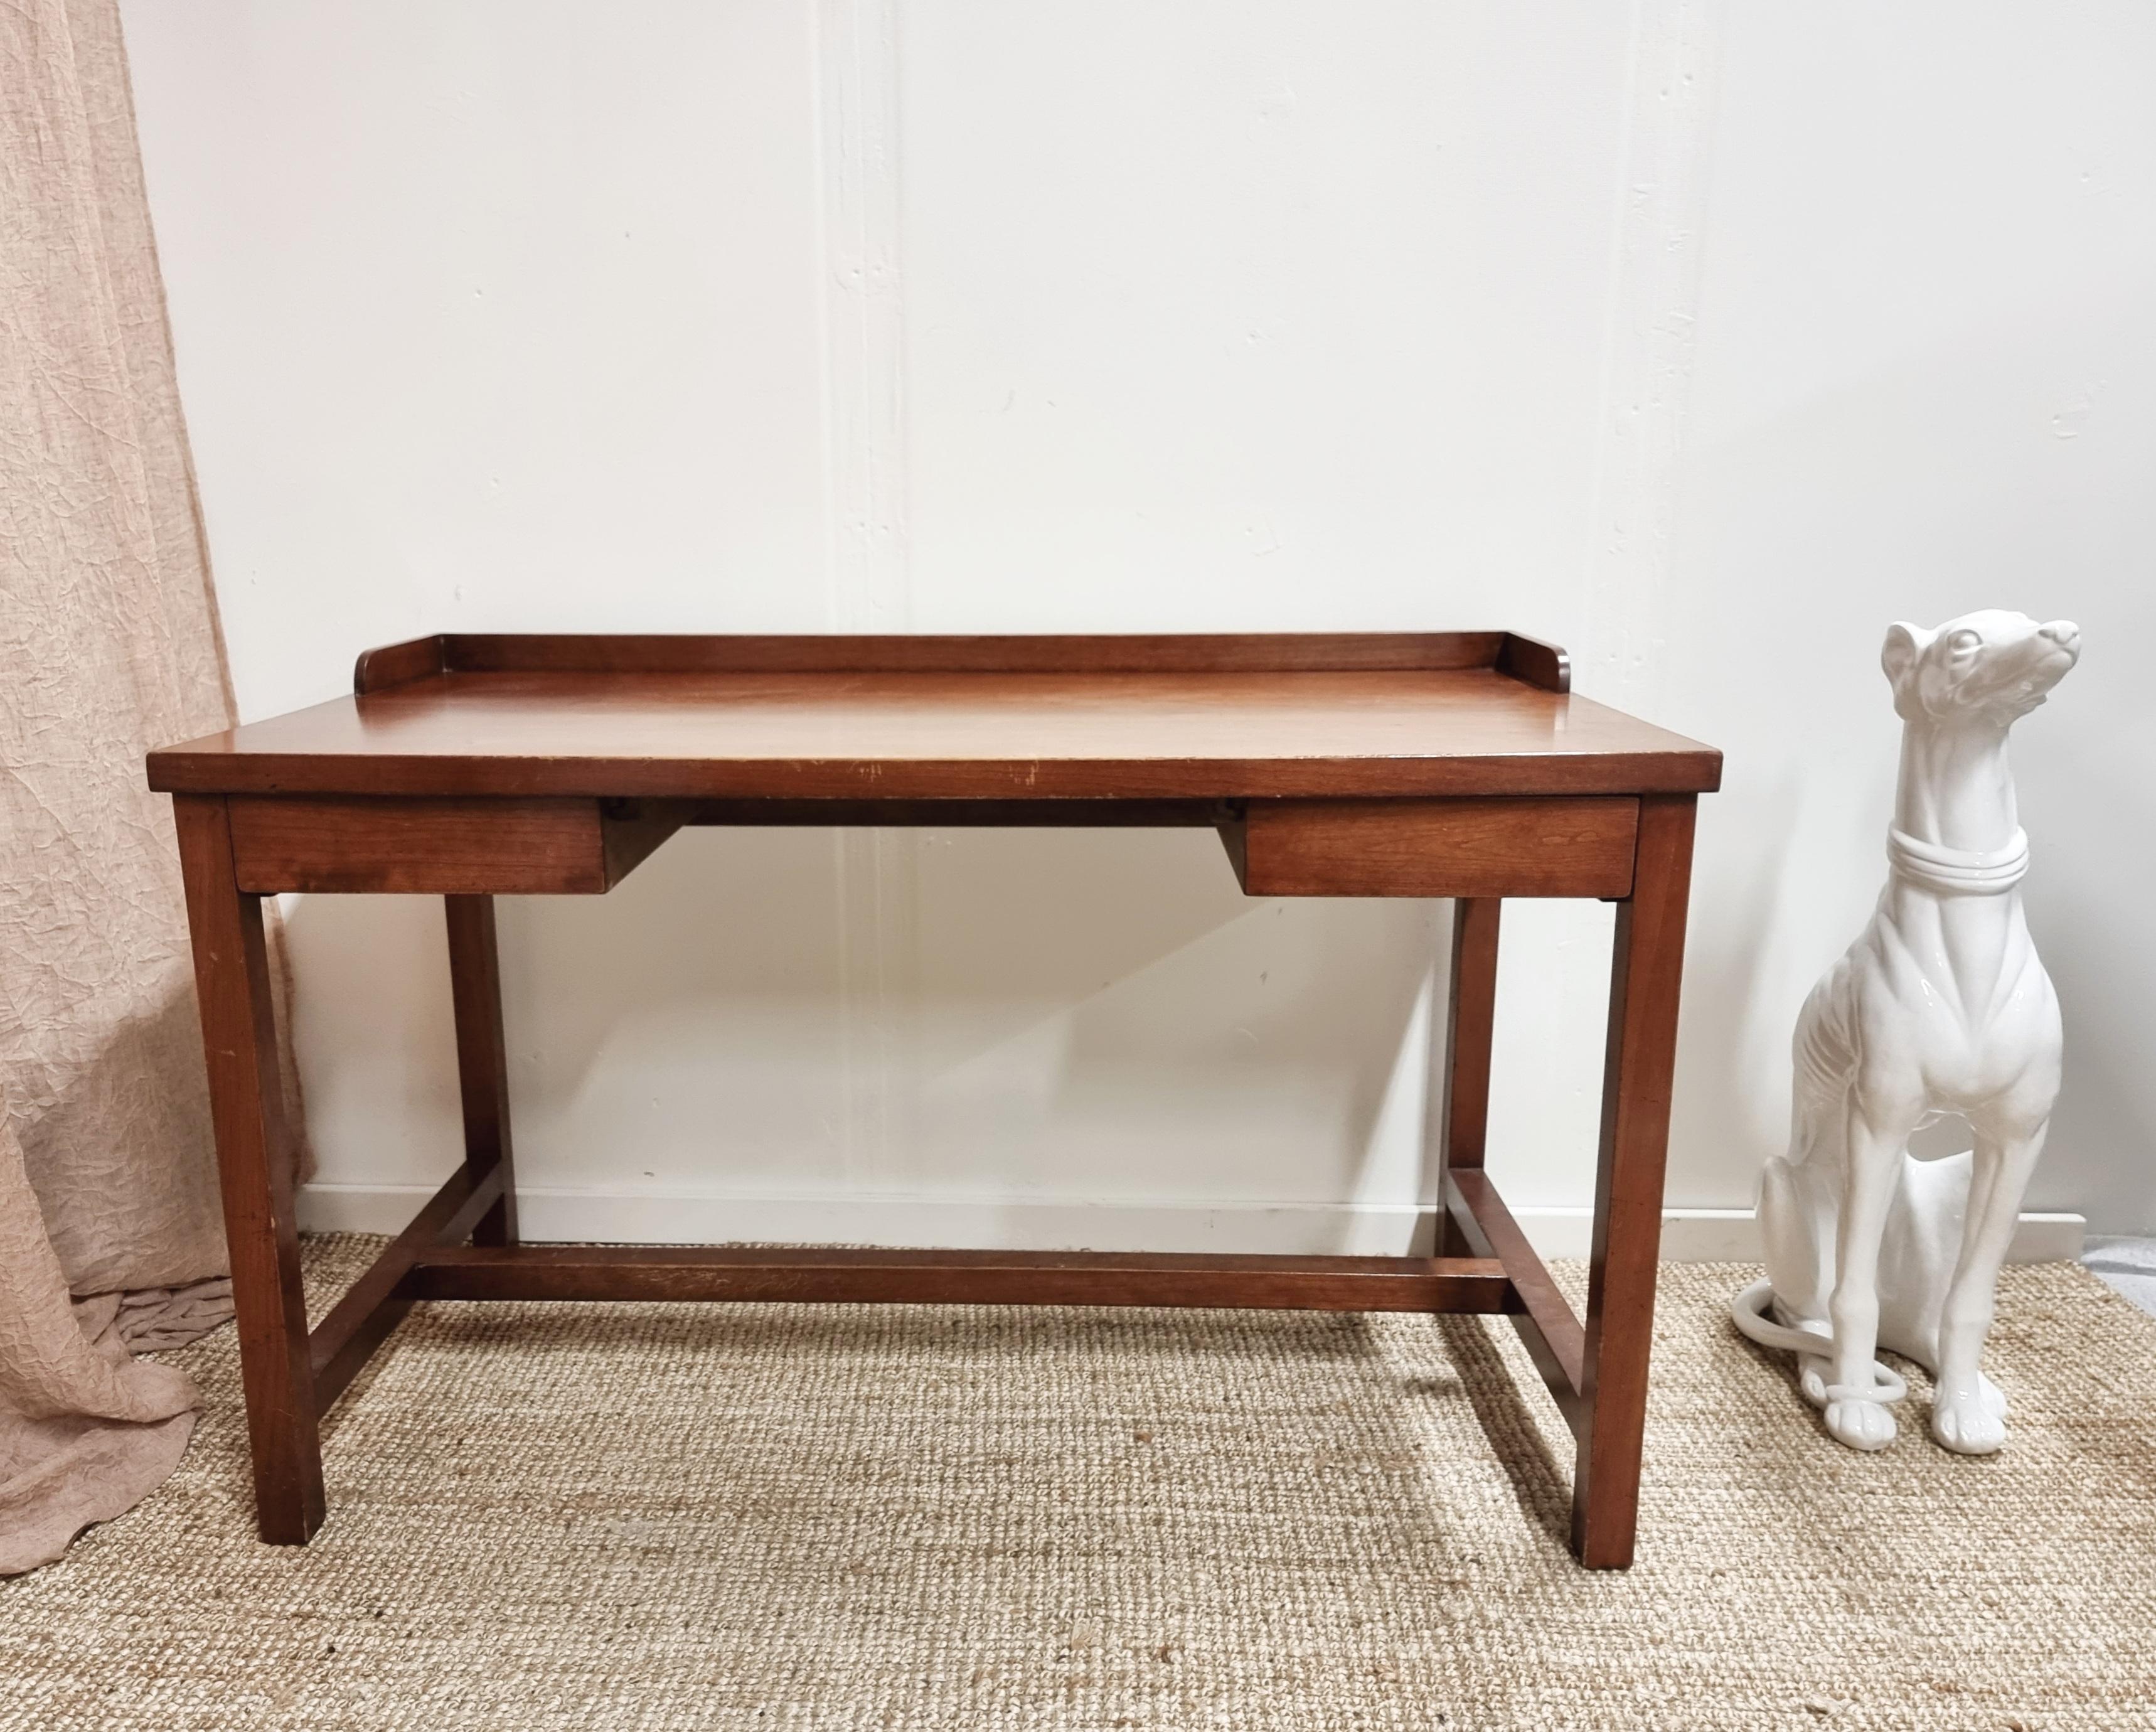 Well-crafted desk with two drawers with dovetail joints and legs attached with wooden nails. Great wrokmanship, Scandinavian Modern, mid-1900s.

The desk is beautiful from all sides. Nice patina and stabile construction, signs of normal wear,